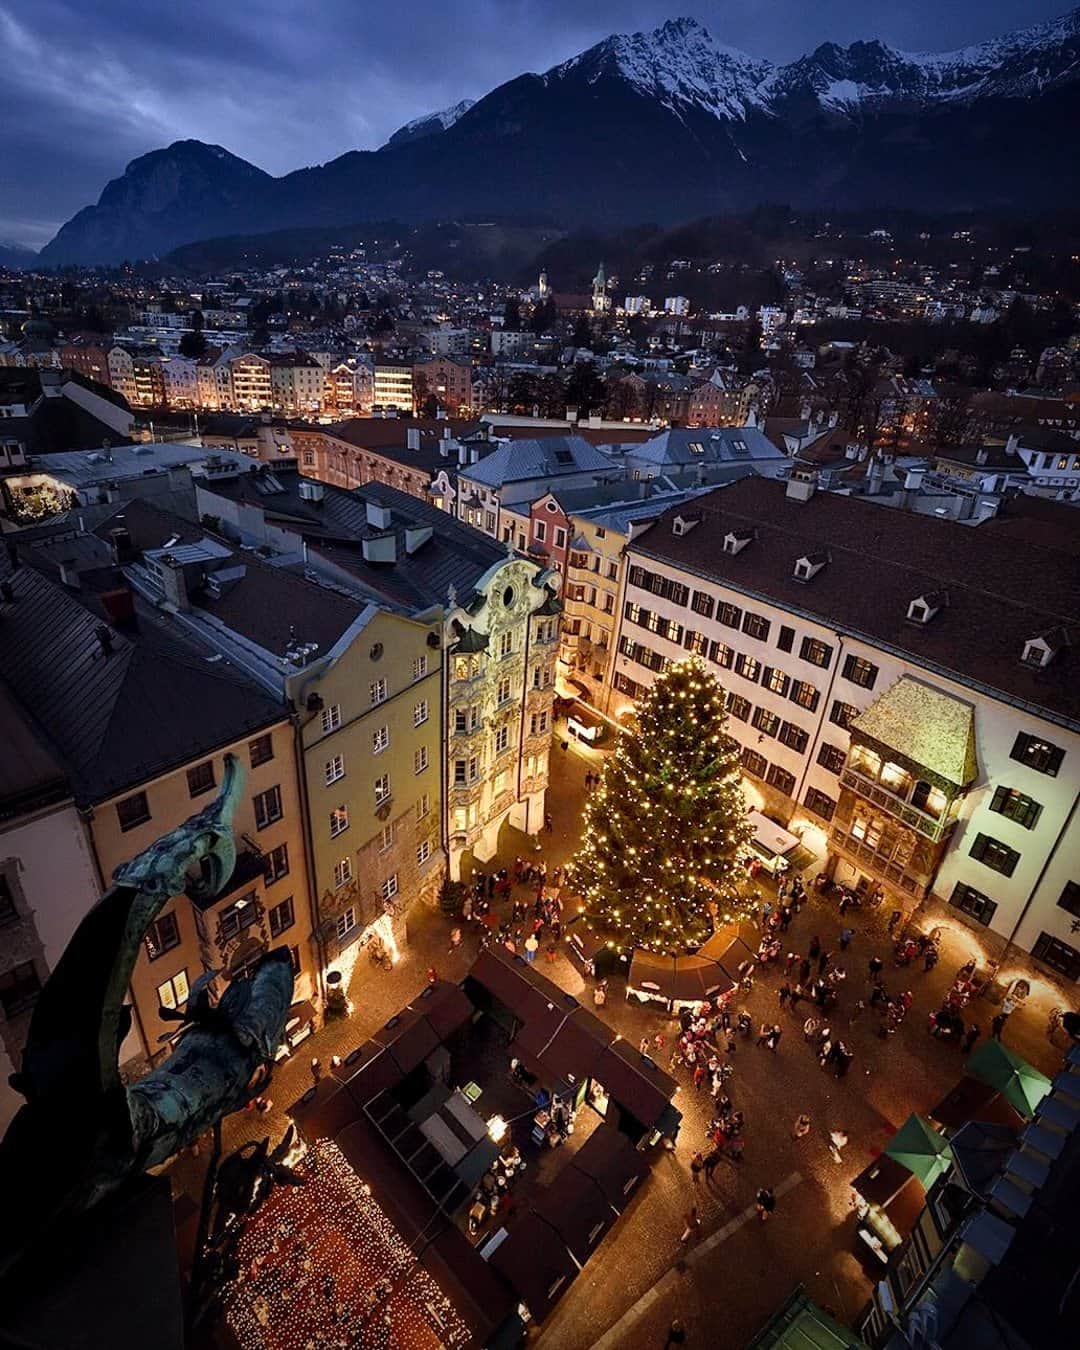 National Geographic Travelのインスタグラム：「Photo by Robbie Shone @shonephoto | Festive shoppers enjoy the Christmas markets in the Old Town of Innsbruck, Austria, set against the Alps. Next to the giant trimmed tree is the Golden Roof, a landmark structure built in 1500 for Emperor Maximilian I.」